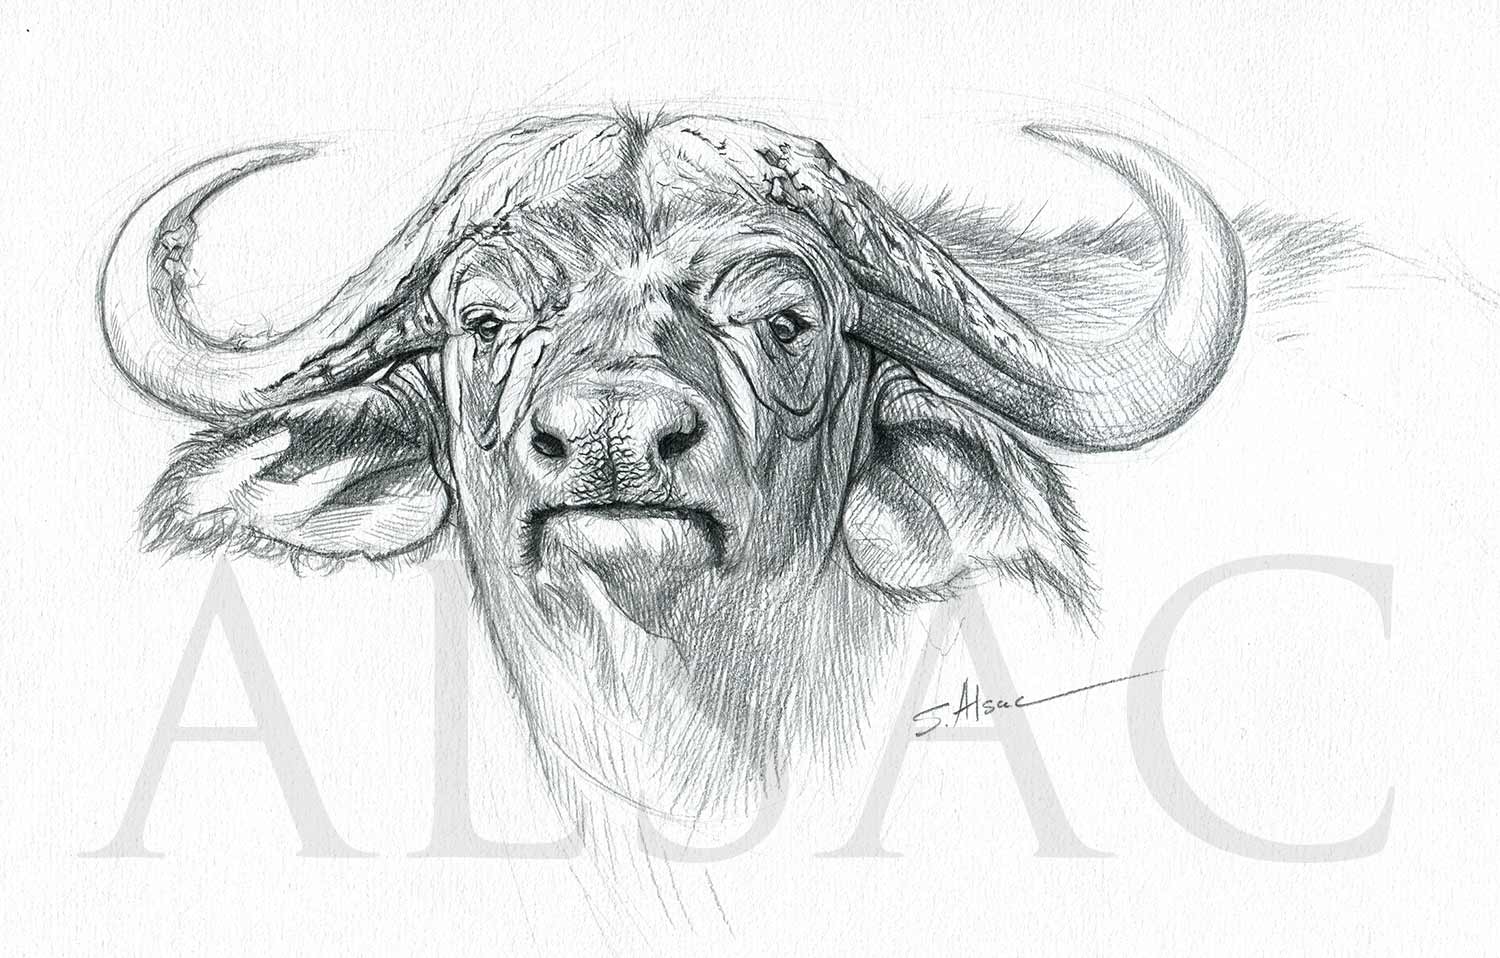 Image Of Bison, Bull, Buffalo For Tattoo, Logo, Emblem, Badge Design Stock  Photo, Picture and Royalty Free Image. Image 74105949.